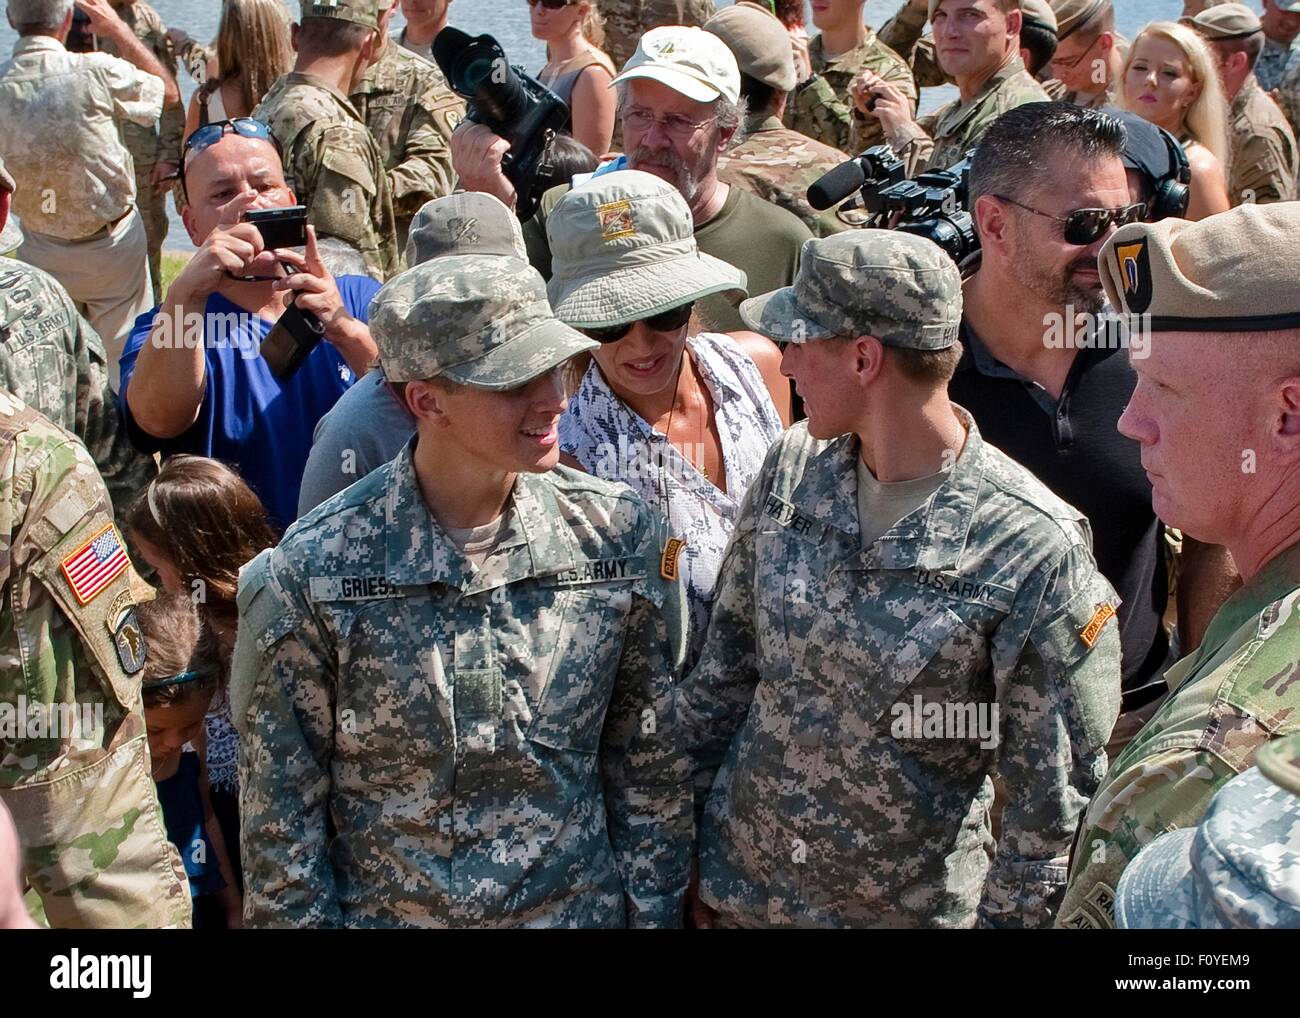 U.S. Army 1st Lt. Shaye Haver, left, and fellow soldier Captain Kristen Griest after graduation ceremonies at the Army Ranger school August 21, 2015 at Fort Benning, Georgia. Haver and fellow soldier 1st Lt. Kristen Griest became the first women to graduate from the 61-day-long Ranger course considered one of the most intense and demanding in the military. Stock Photo